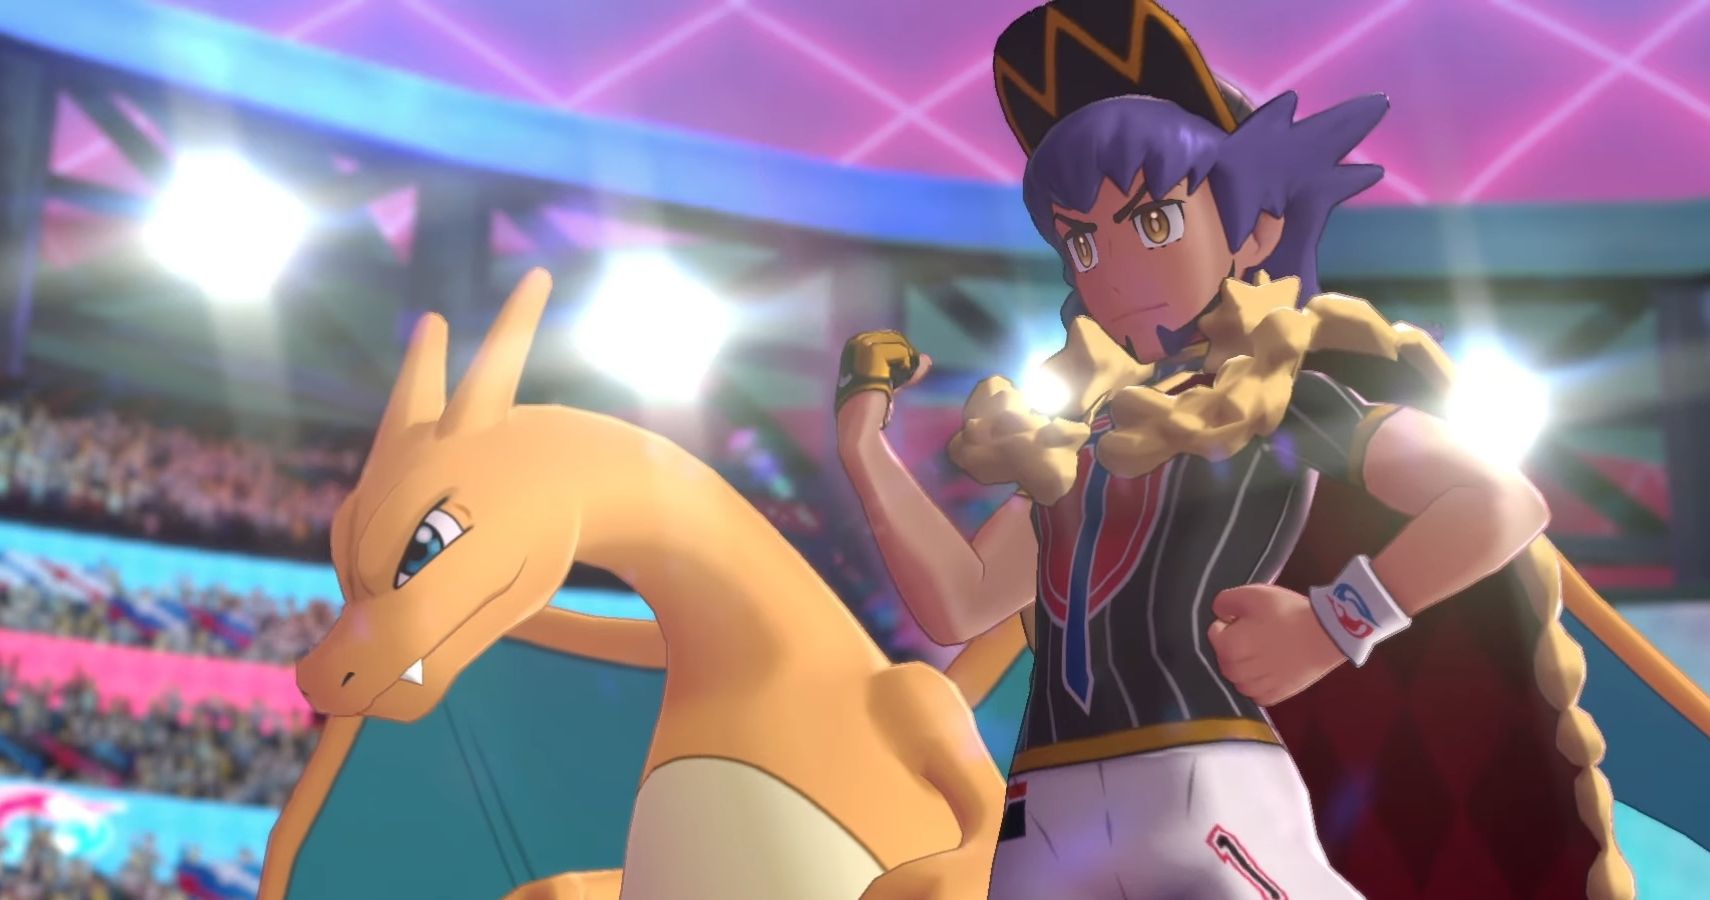 Pokémon Sword and Shield cartoon shows a gym leader dealing with defeat -  Polygon